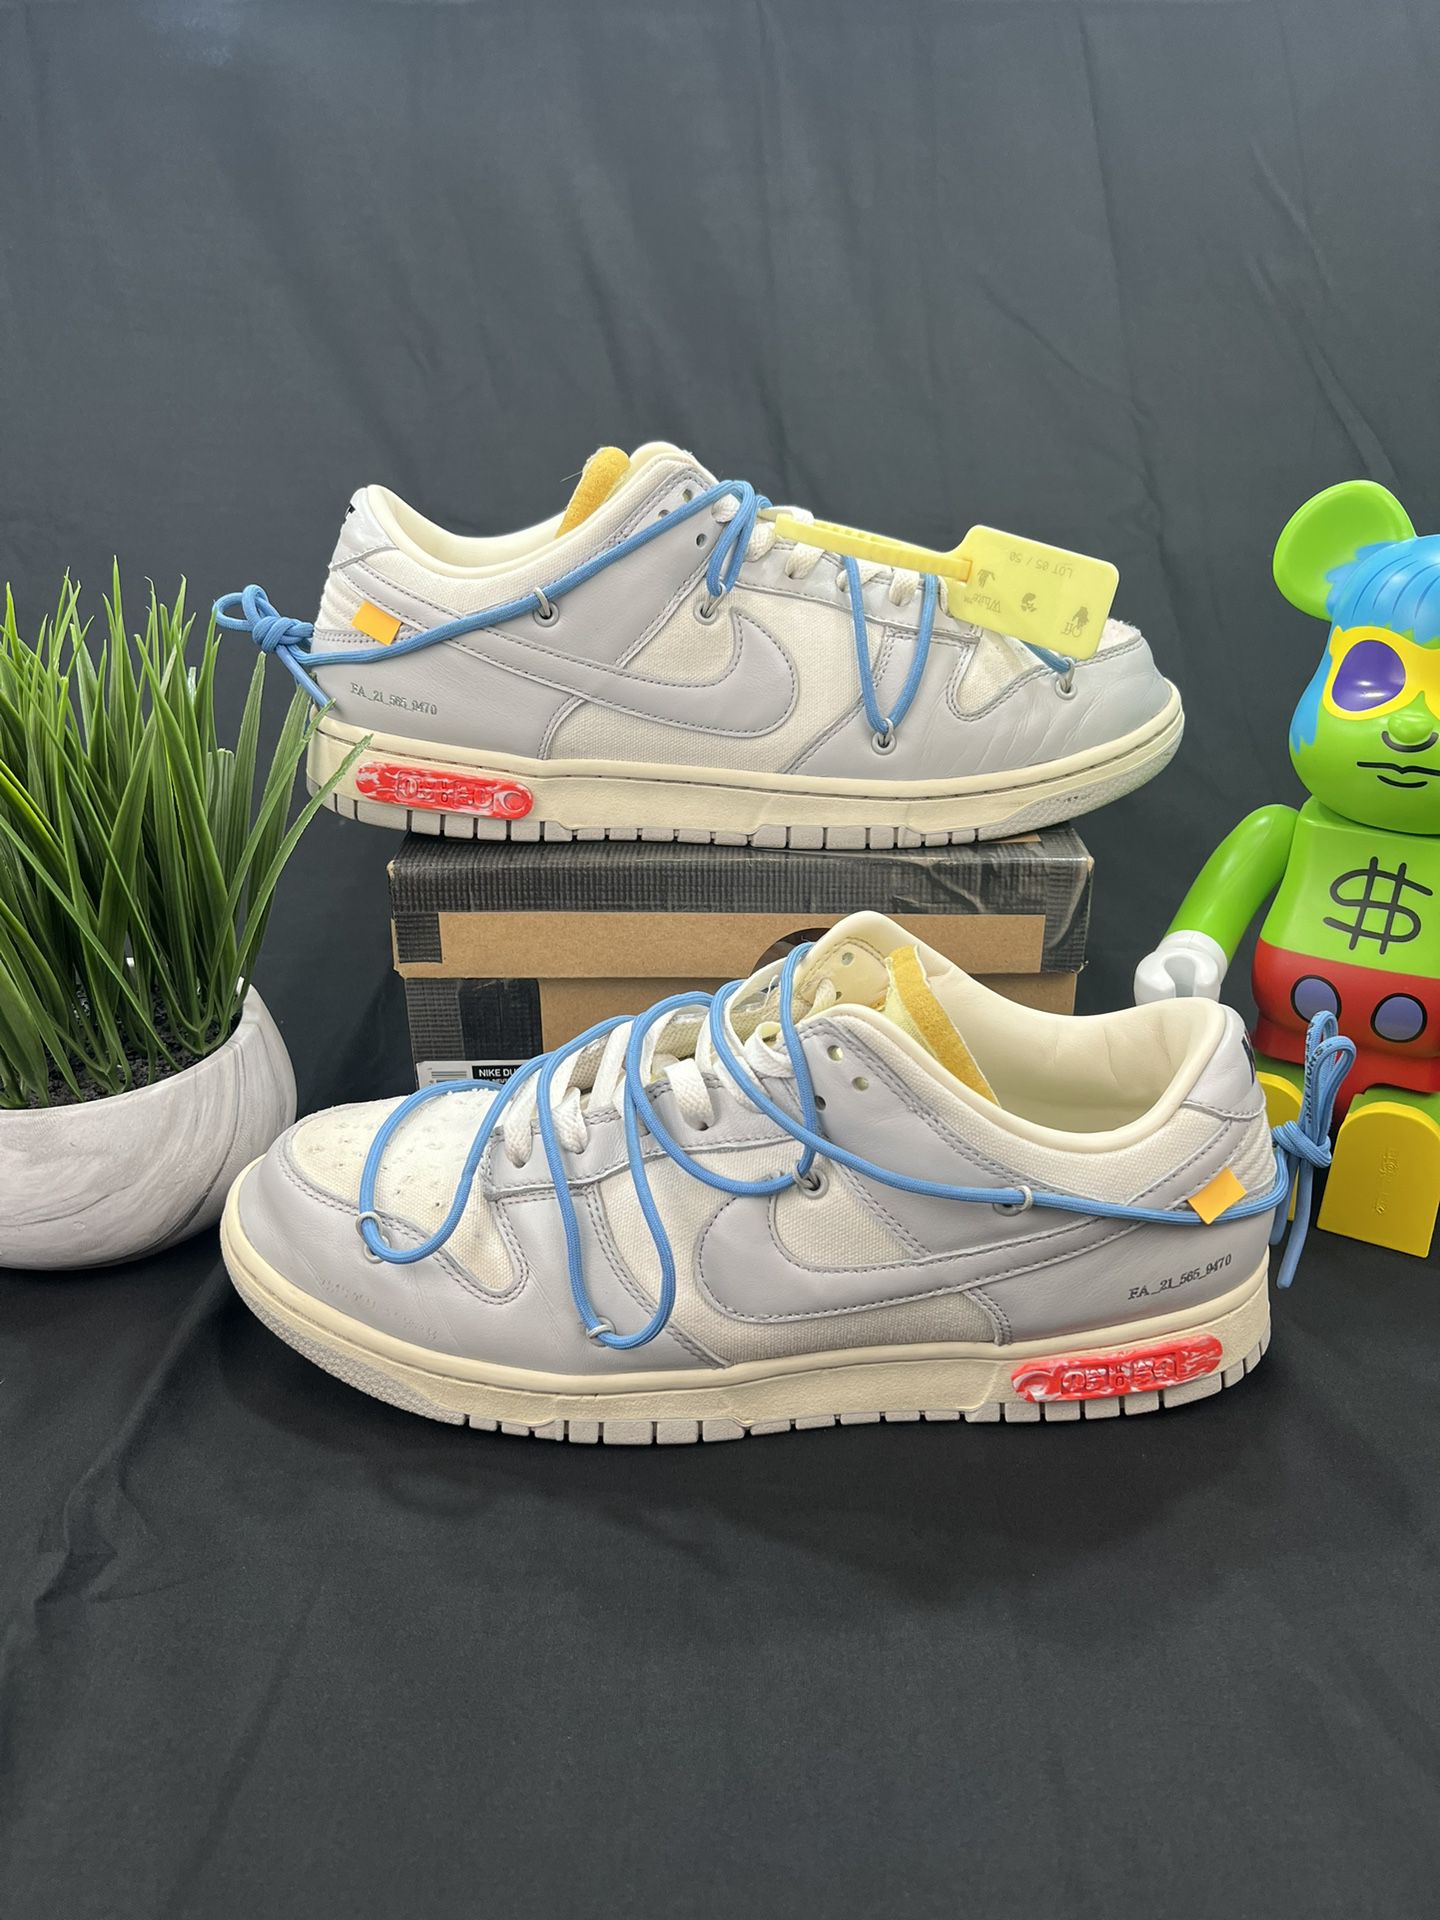 Off White x Nike Dunk Low “Lot 05/50”